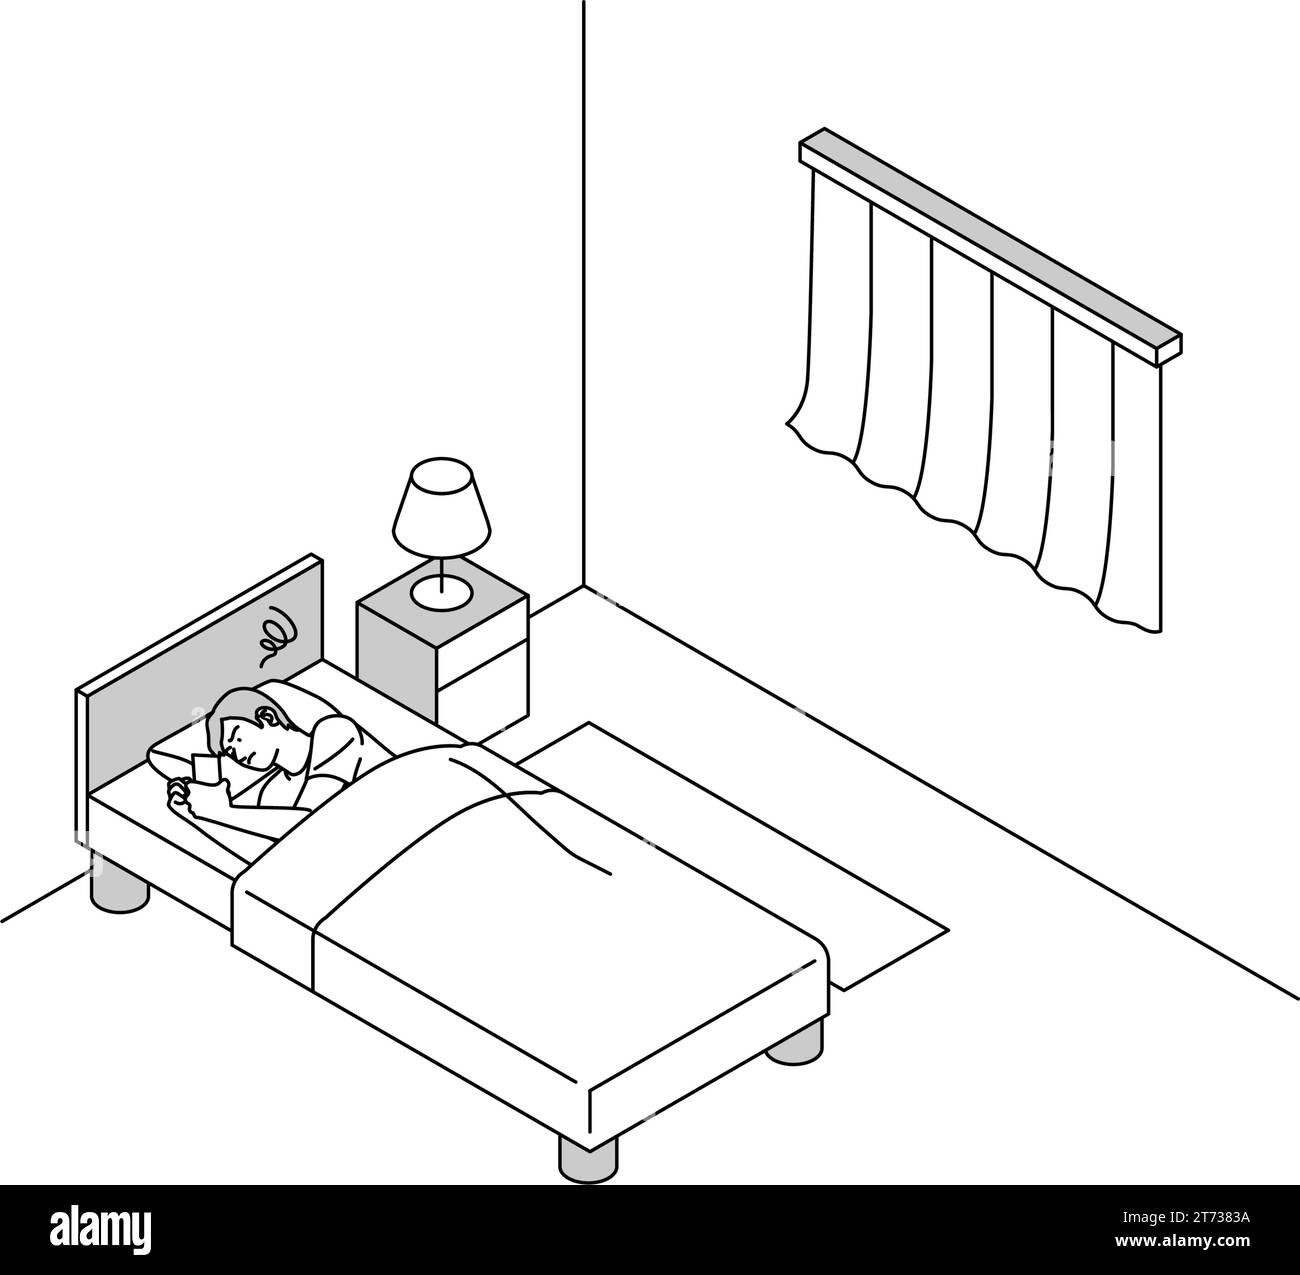 Noise problems in rental properties: People who cannot sleep at night due to ambient noise, Vector Illustration Stock Vector